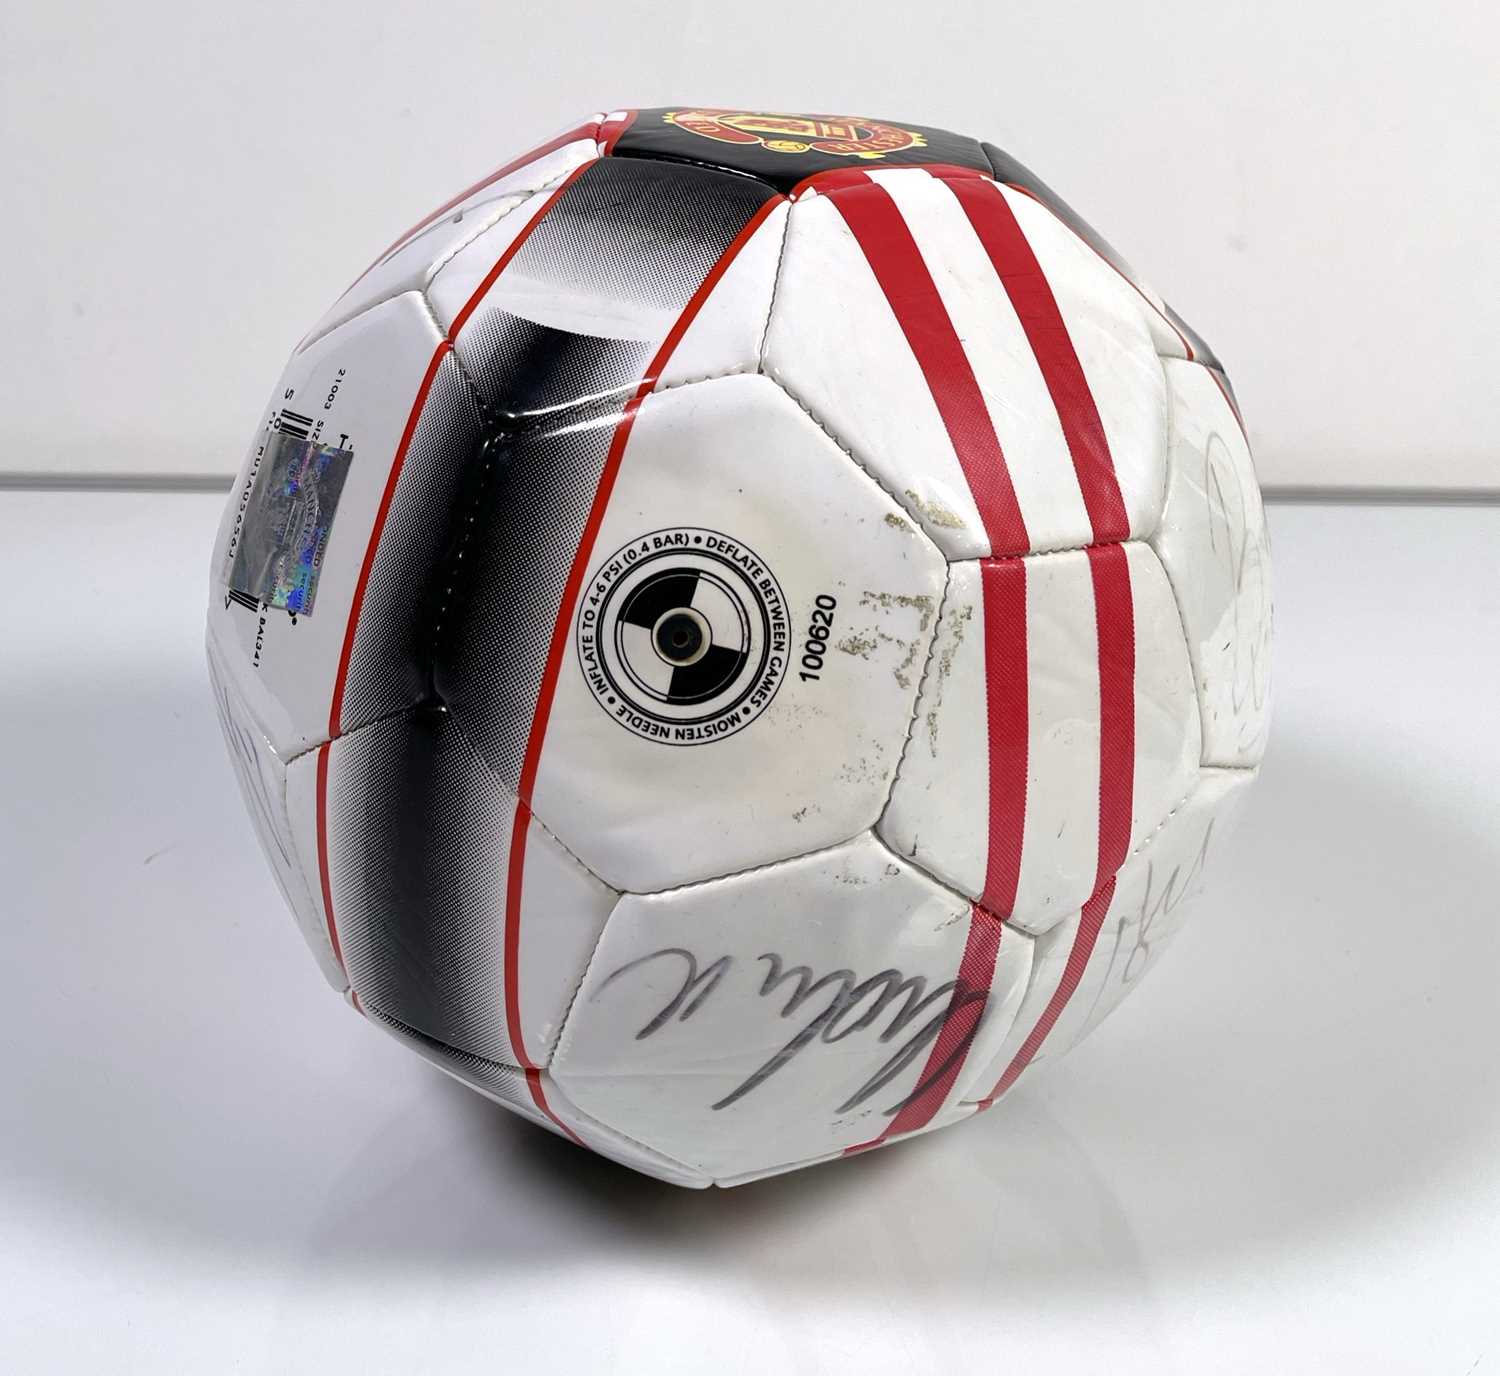 SIGNED MANCHESTER UNITED FOOTBALL. - Image 3 of 6